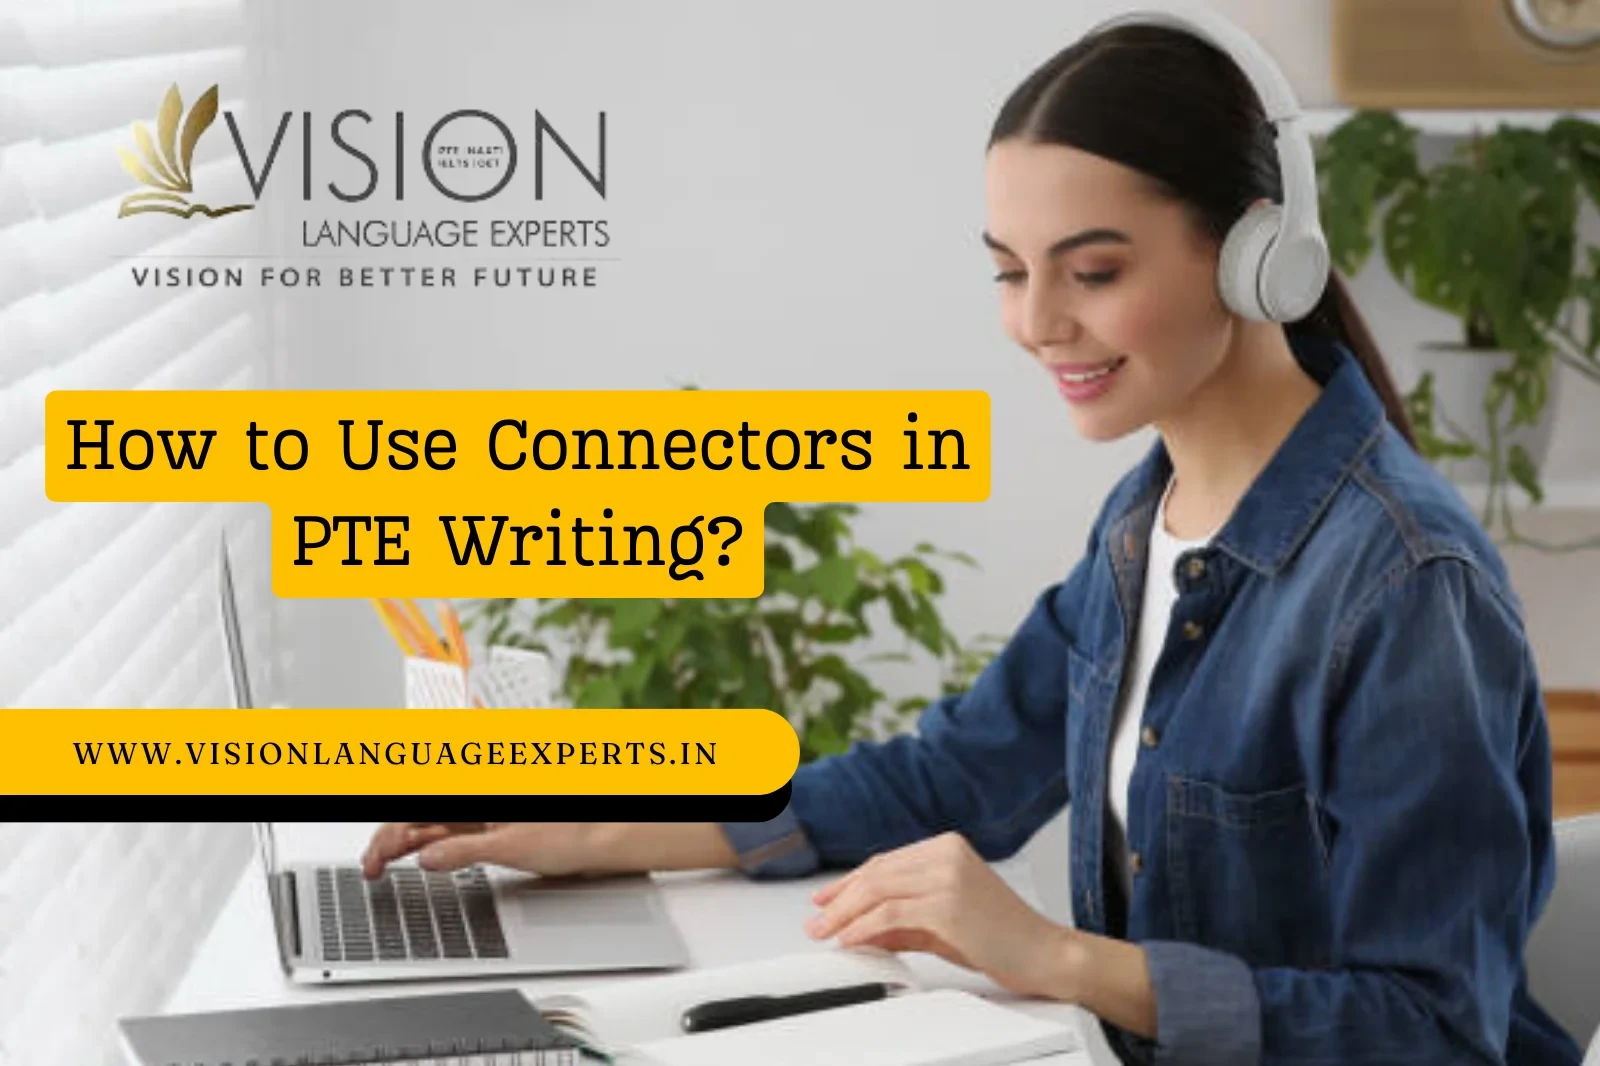 How to Use Connectors in PTE Writing?